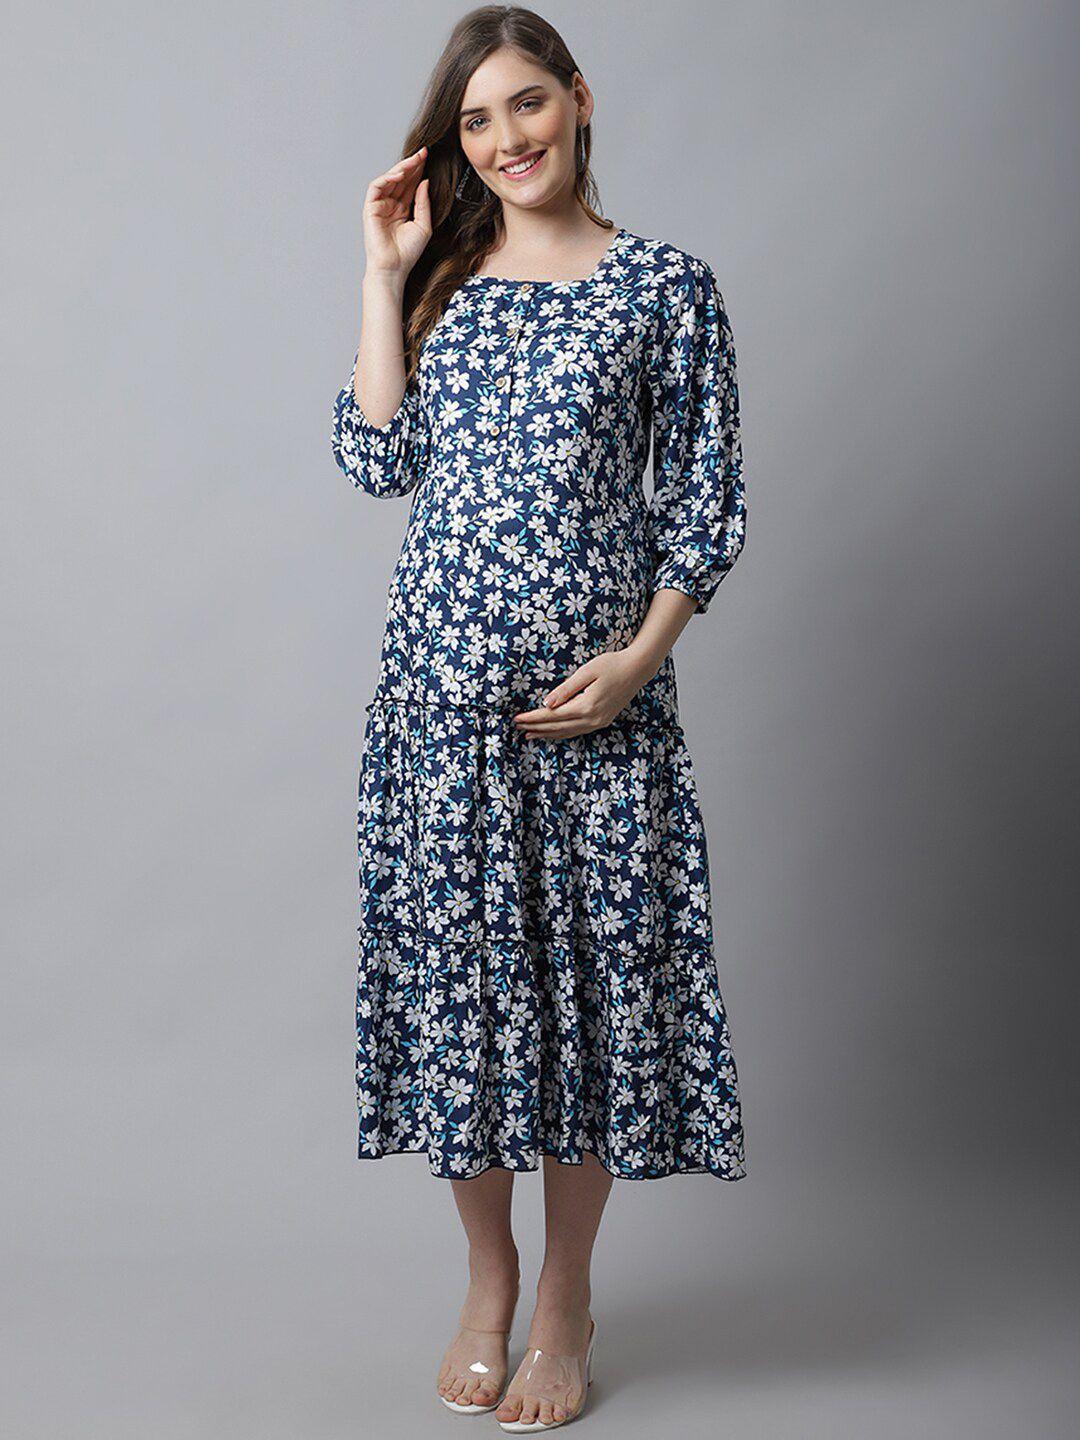 frempy women blue & white floral printed a-line maternity dress